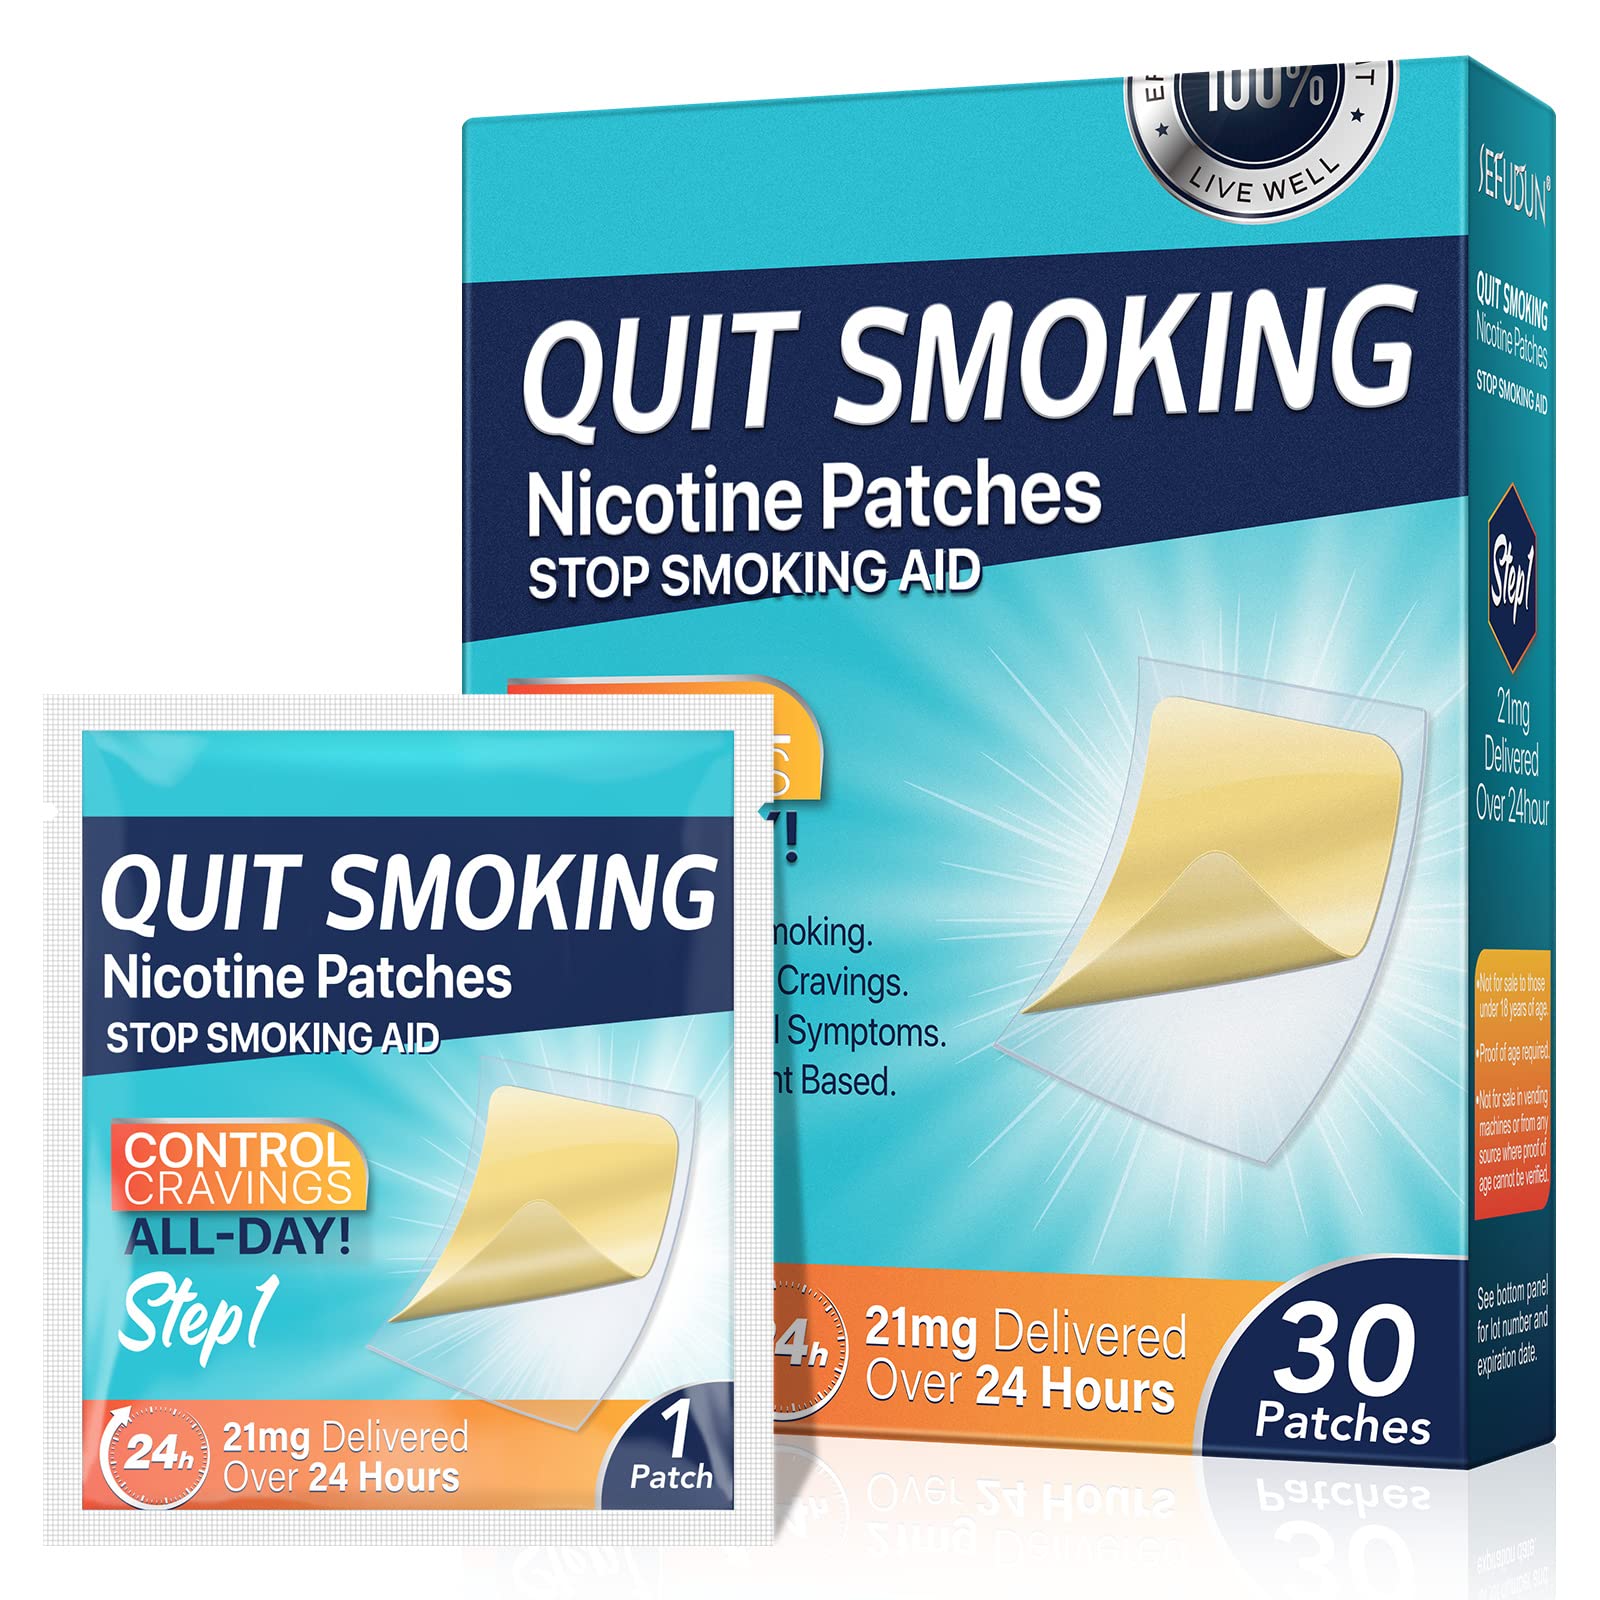 Stop Aid,Helping Quit Patch,Stop Patches,Step 1,30 Patches,21mg Delivered Over 24 Hours